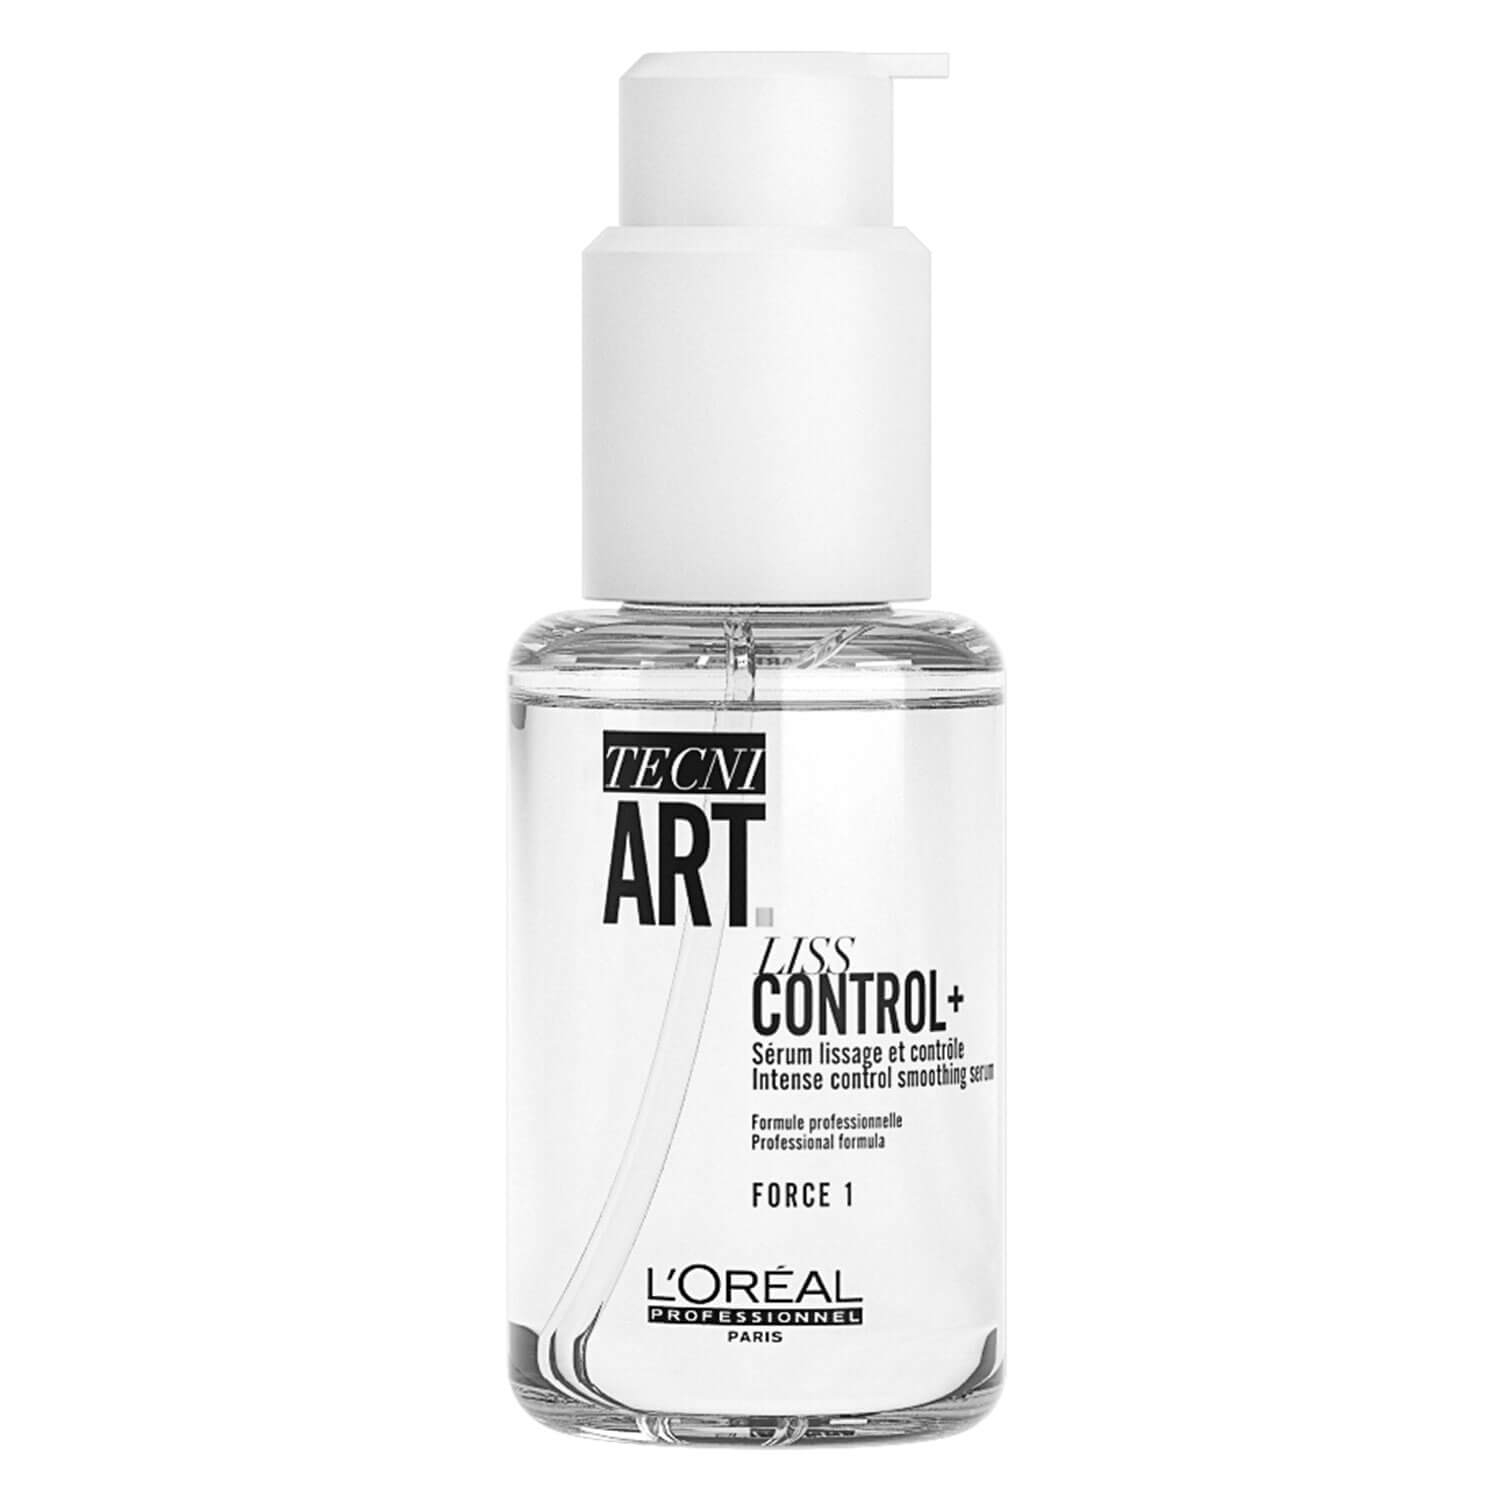 Product image from Tecni.art Essentials - Liss Control+